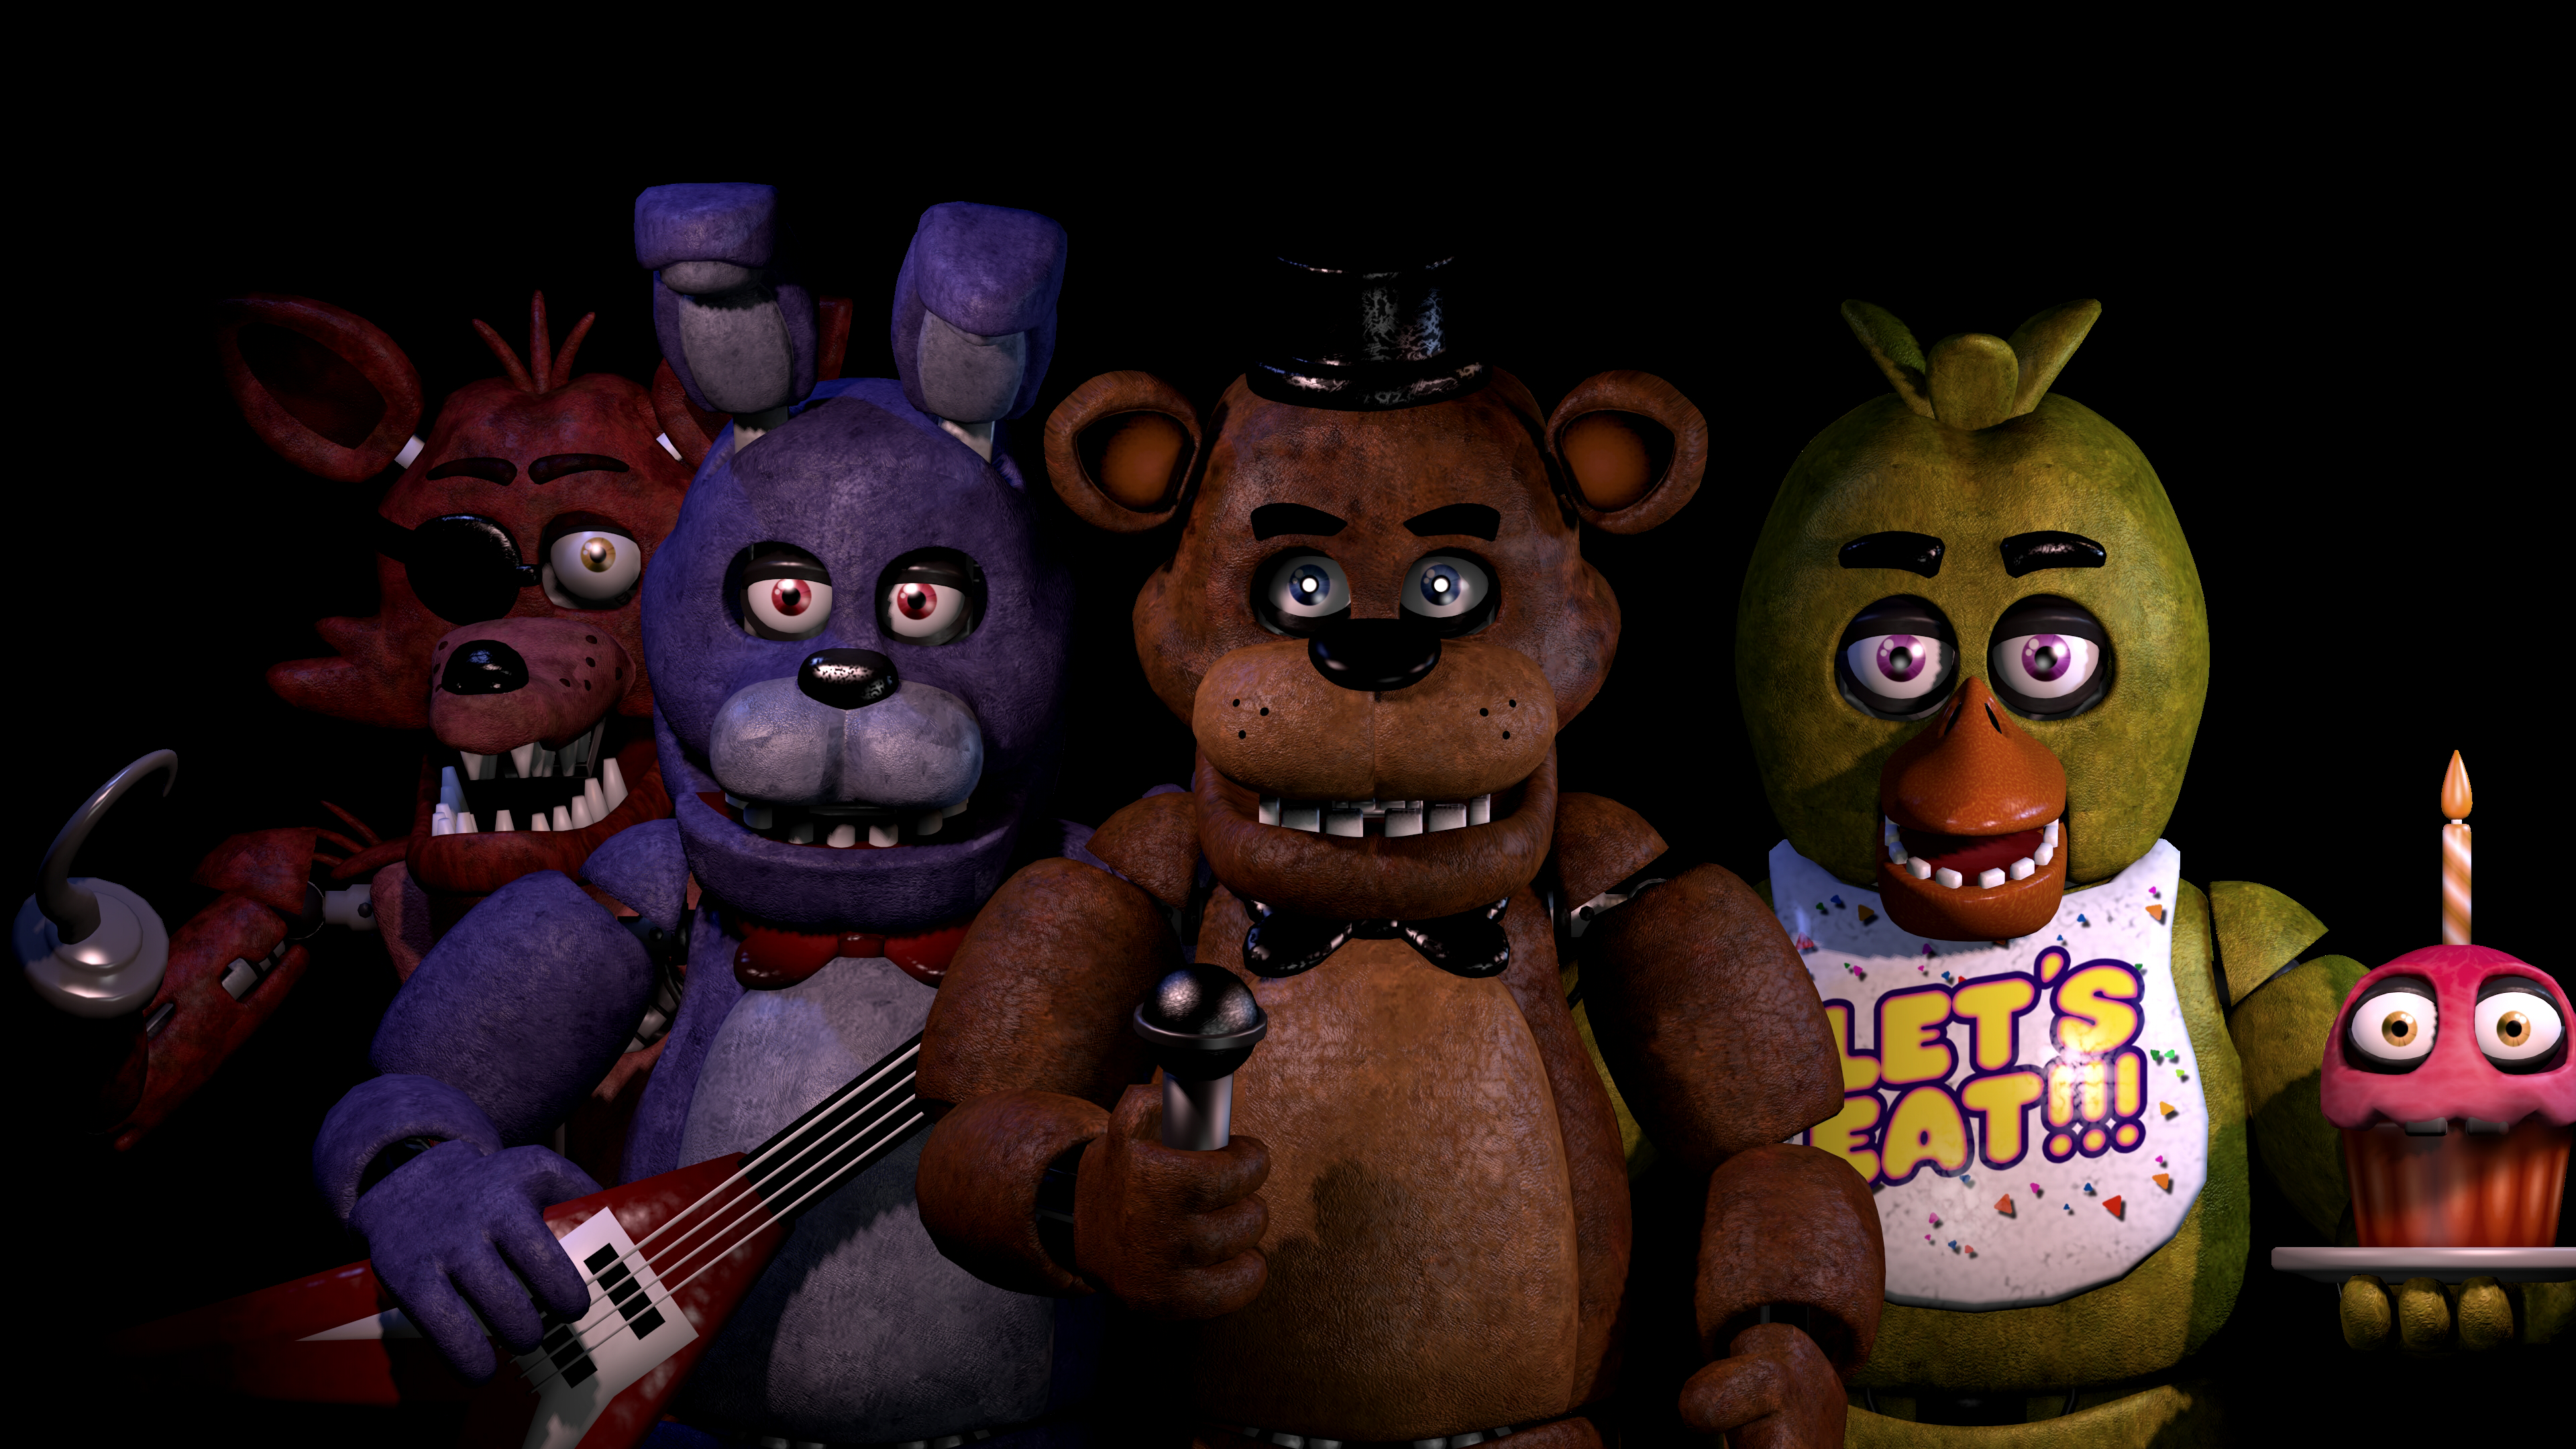 five nights at freddy's, bonnie (five nights at freddy's), foxy (five nights at freddy's), video game, chica (five nights at freddy's), freddy (five nights at freddy's)